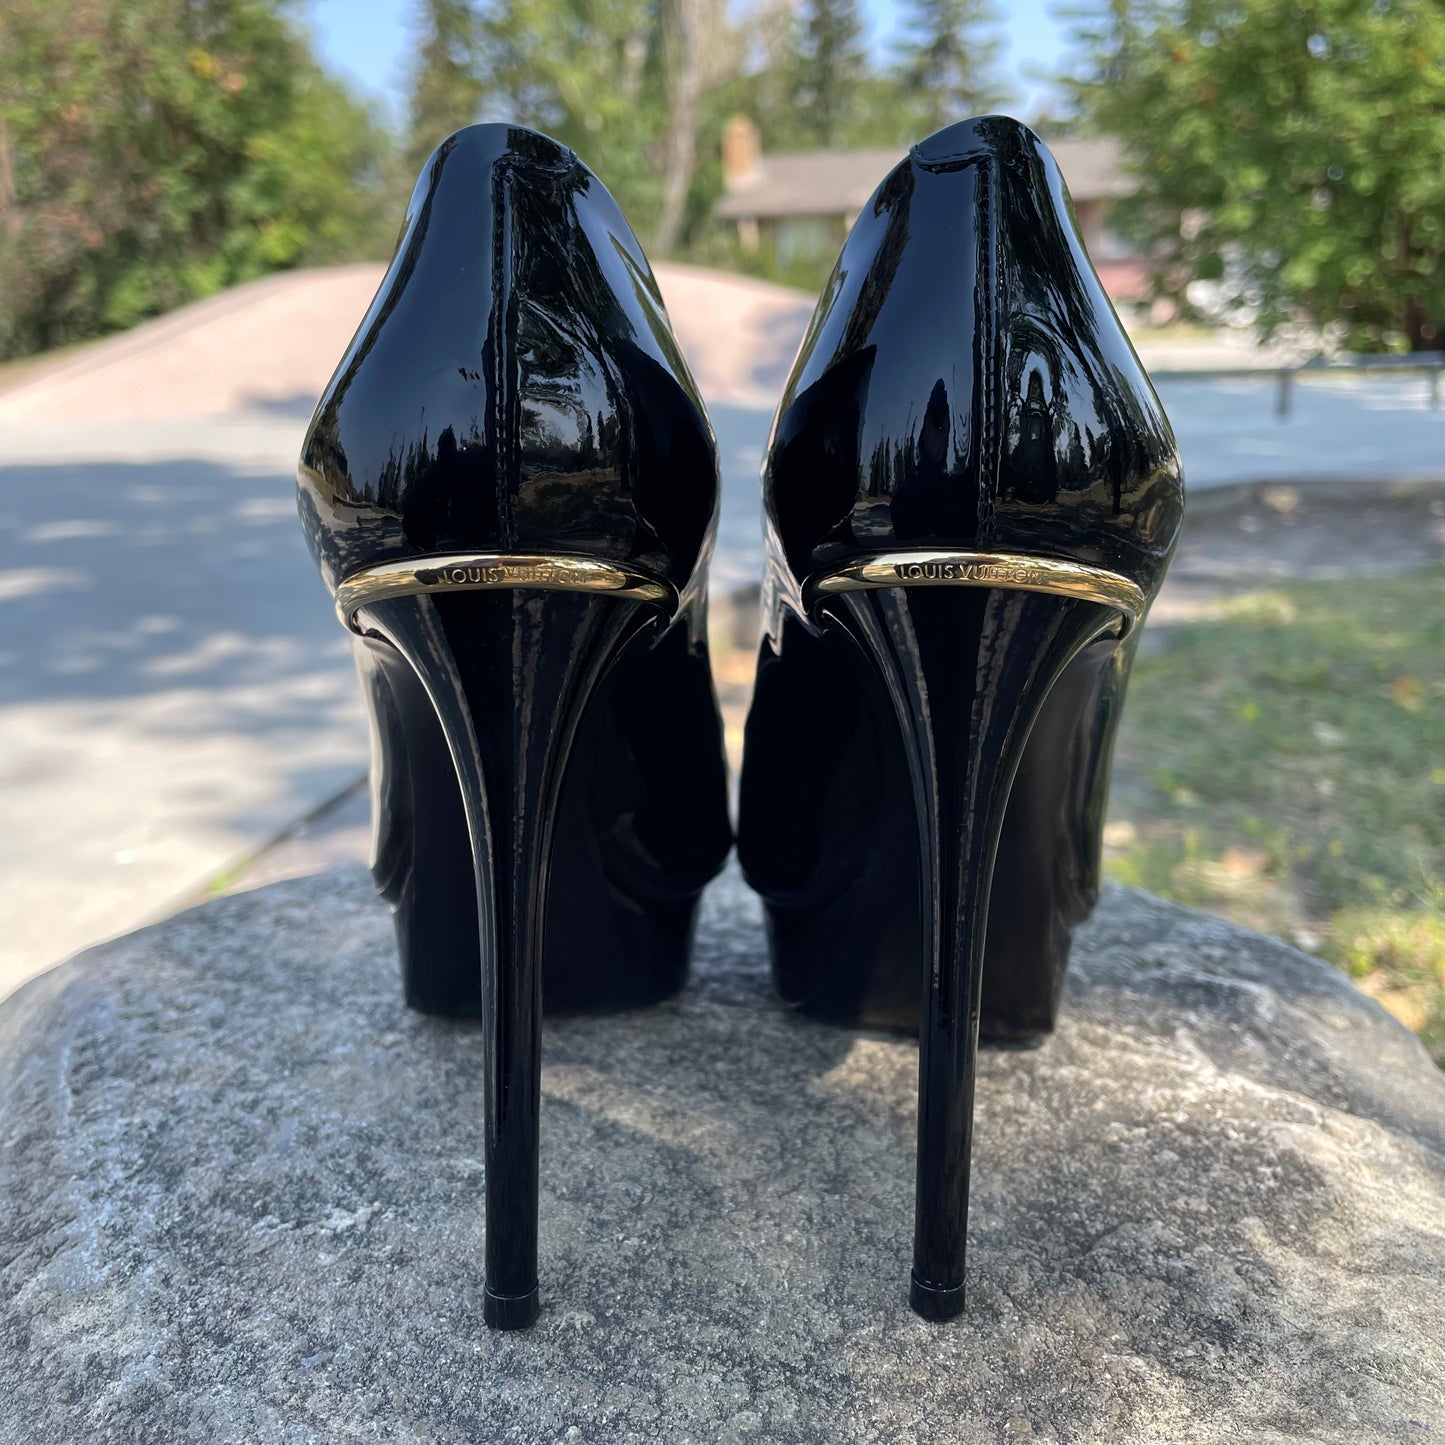 Louis Vuitton Stiletto Patent Leather Heels for Women for sale